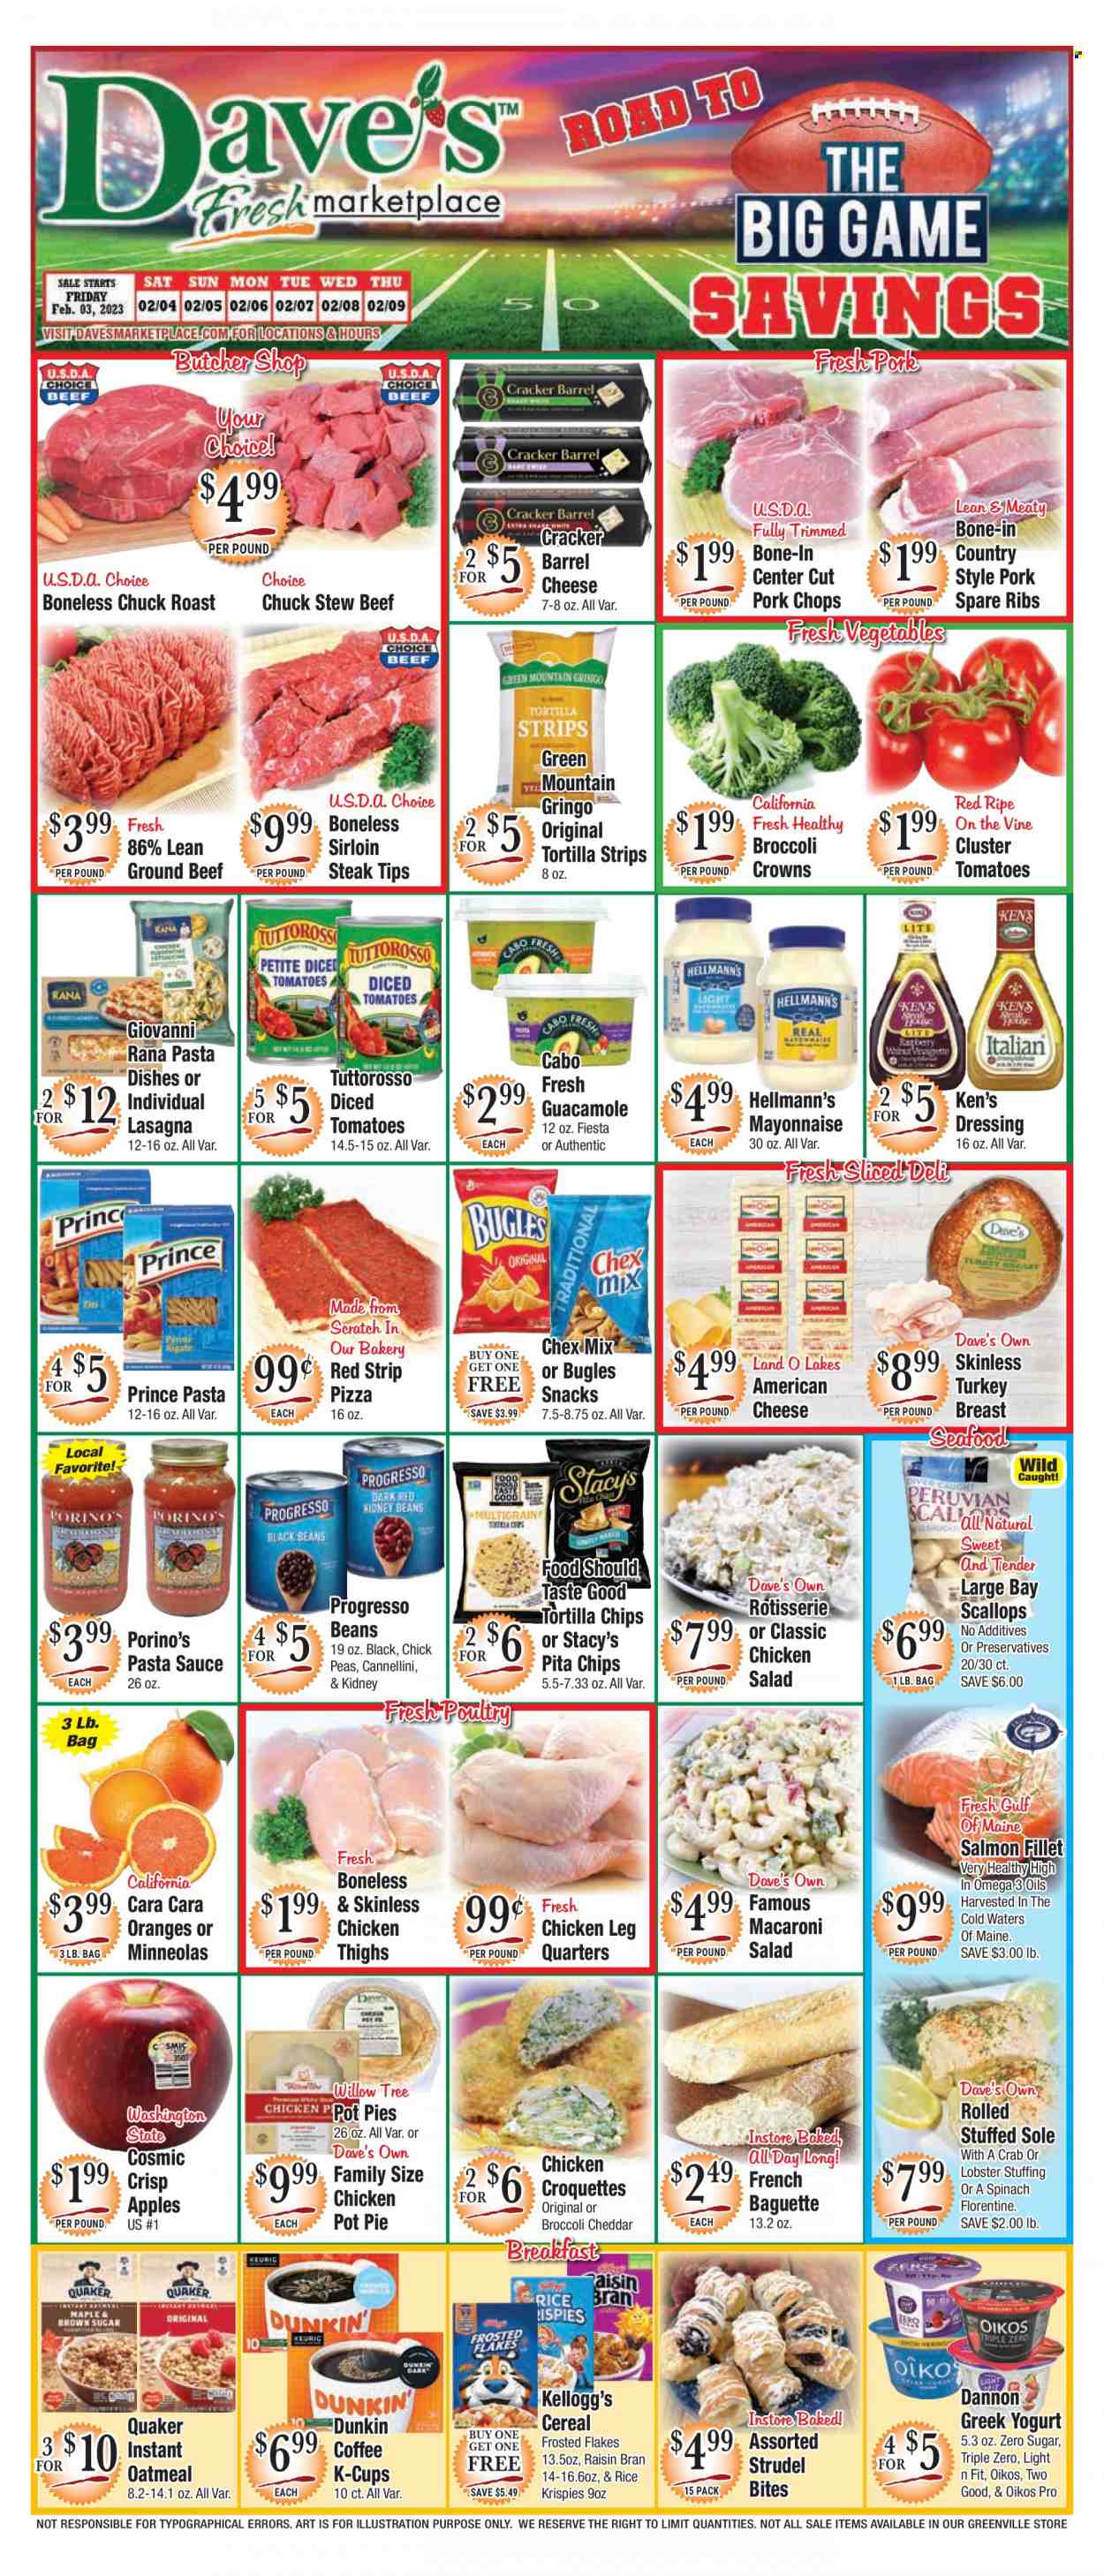 thumbnail - Dave's Fresh Marketplace Flyer - 02/03/2023 - 02/09/2023 - Sales products - baguette, pie, strudel, pot pie, salad, apples, oranges, lobster, salmon, salmon fillet, scallops, seafood, crab, pizza, pasta sauce, sauce, Quaker, Progresso, lasagna meal, Giovanni Rana, pasta sides, Rana, guacamole, macaroni salad, chicken salad, american cheese, greek yoghurt, yoghurt, Oikos, Dannon, mayonnaise, Hellmann’s, potato croquettes, snack, crackers, Kellogg's, tortilla chips, chips, Chex Mix, pita chips, oatmeal, diced tomatoes, cereals, Rice Krispies, Frosted Flakes, Raisin Bran, dressing, coffee, coffee capsules, K-Cups, Green Mountain, turkey breast, chicken legs, chicken thighs, beef meat, beef sirloin, ground beef, steak, sirloin steak, chuck roast, ribs, pork chops, pork meat, pork ribs, pork spare ribs. Page 1.